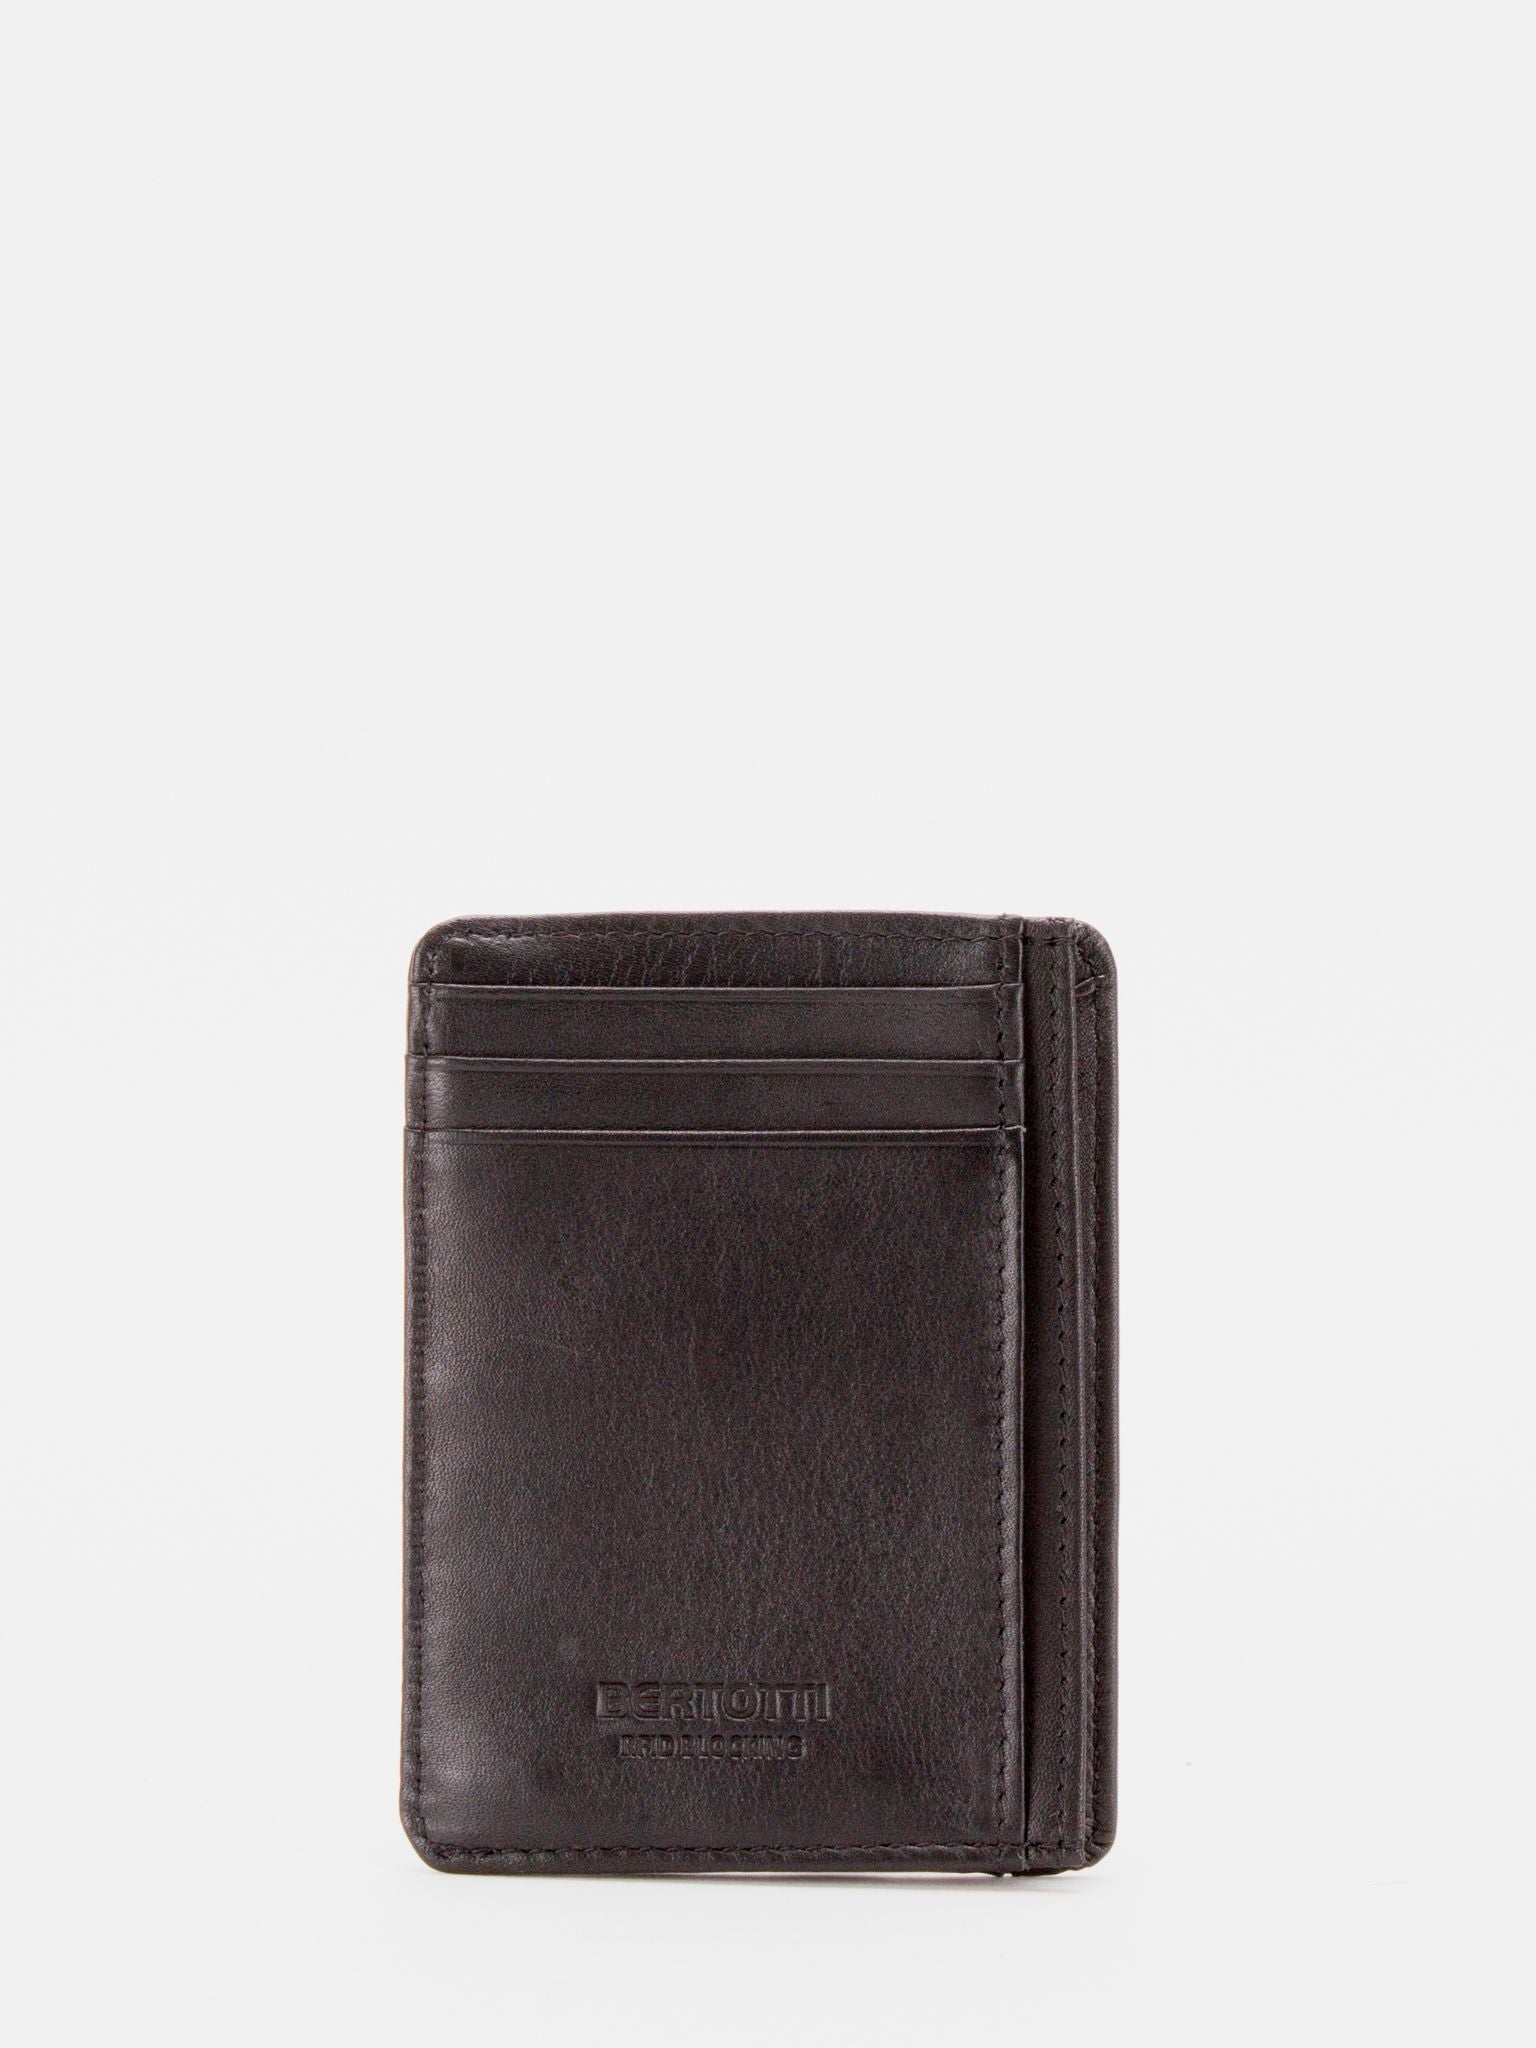 Get-A-Way Leather Card Holder